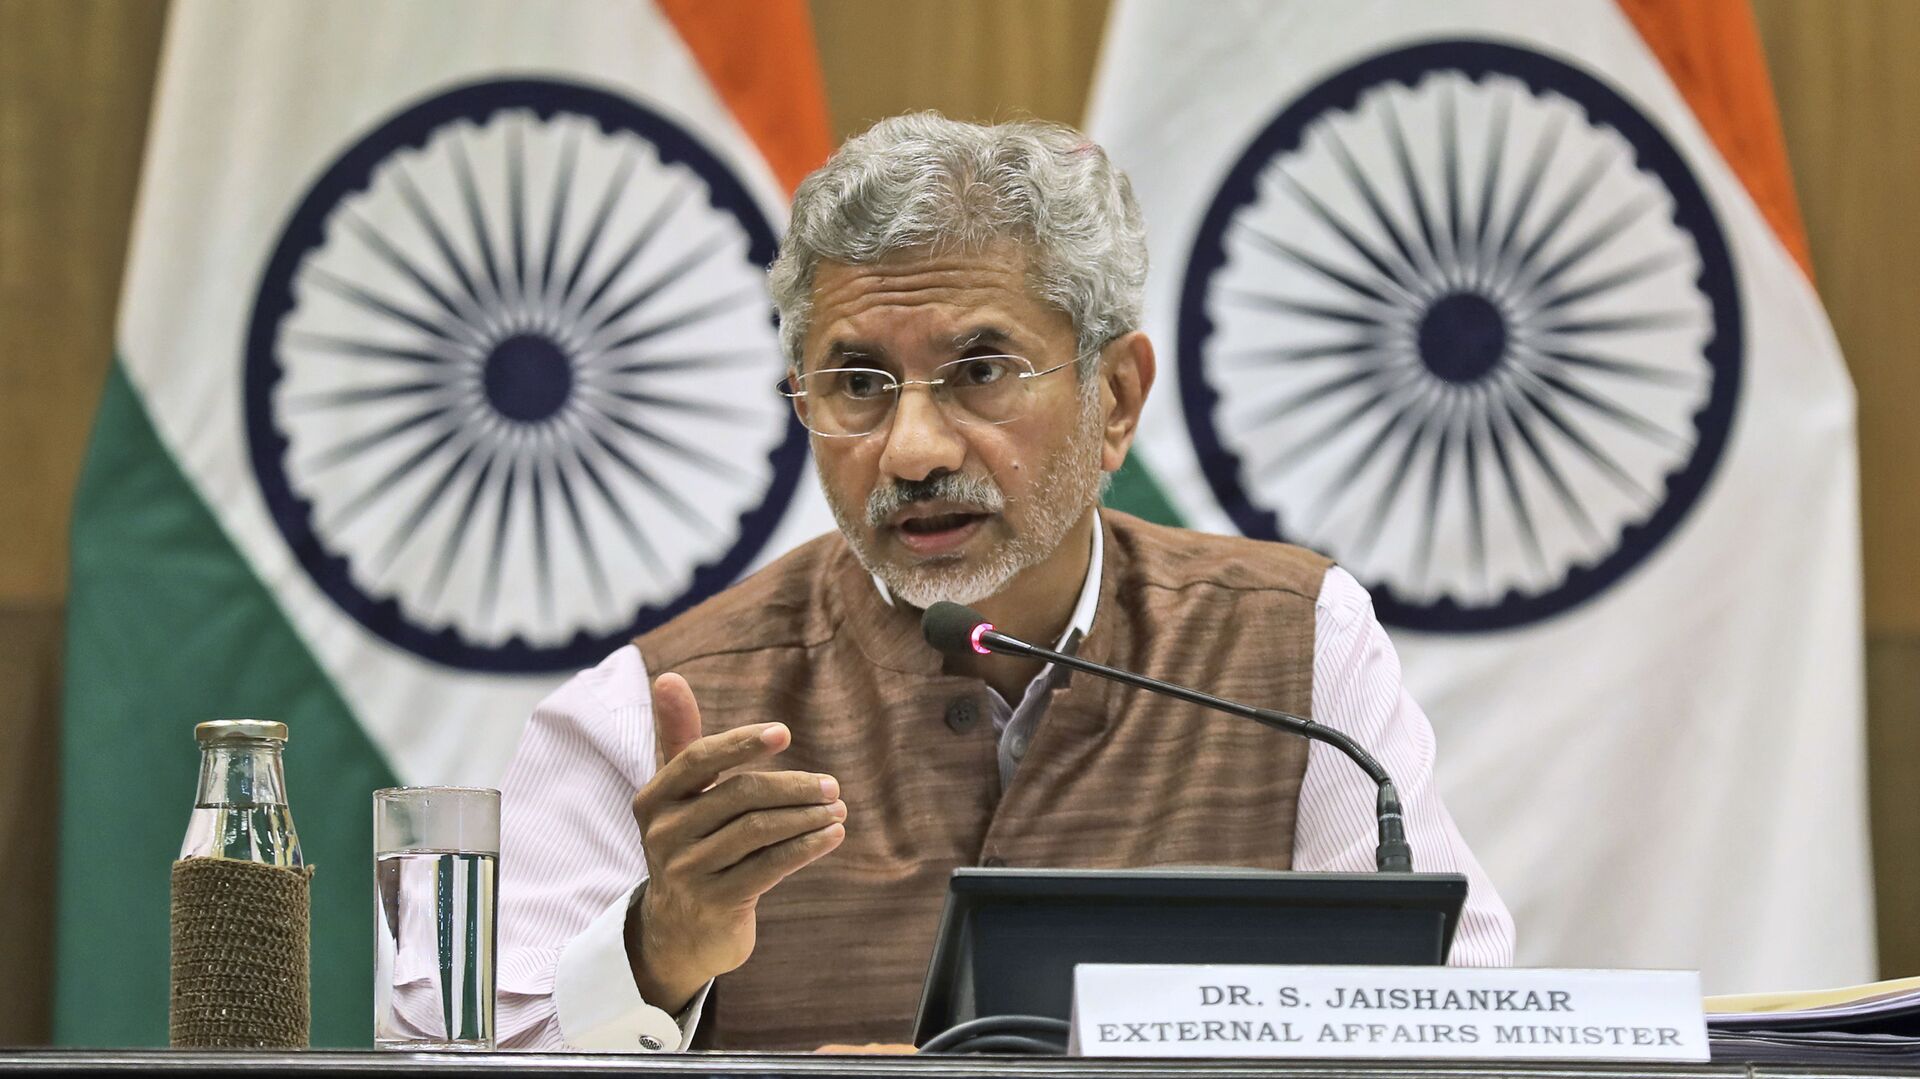 Indian Foreign Minister Subrahmanyam Jaishankar addresses a press conference on the performance of the ministry of external affairs in first 100 days of Prime Minister Narendra Modi's new term in office in New Delhi, India, Tuesday, Sept. 17, 2019 - اسپوتنیک افغانستان  , 1920, 13.08.2022